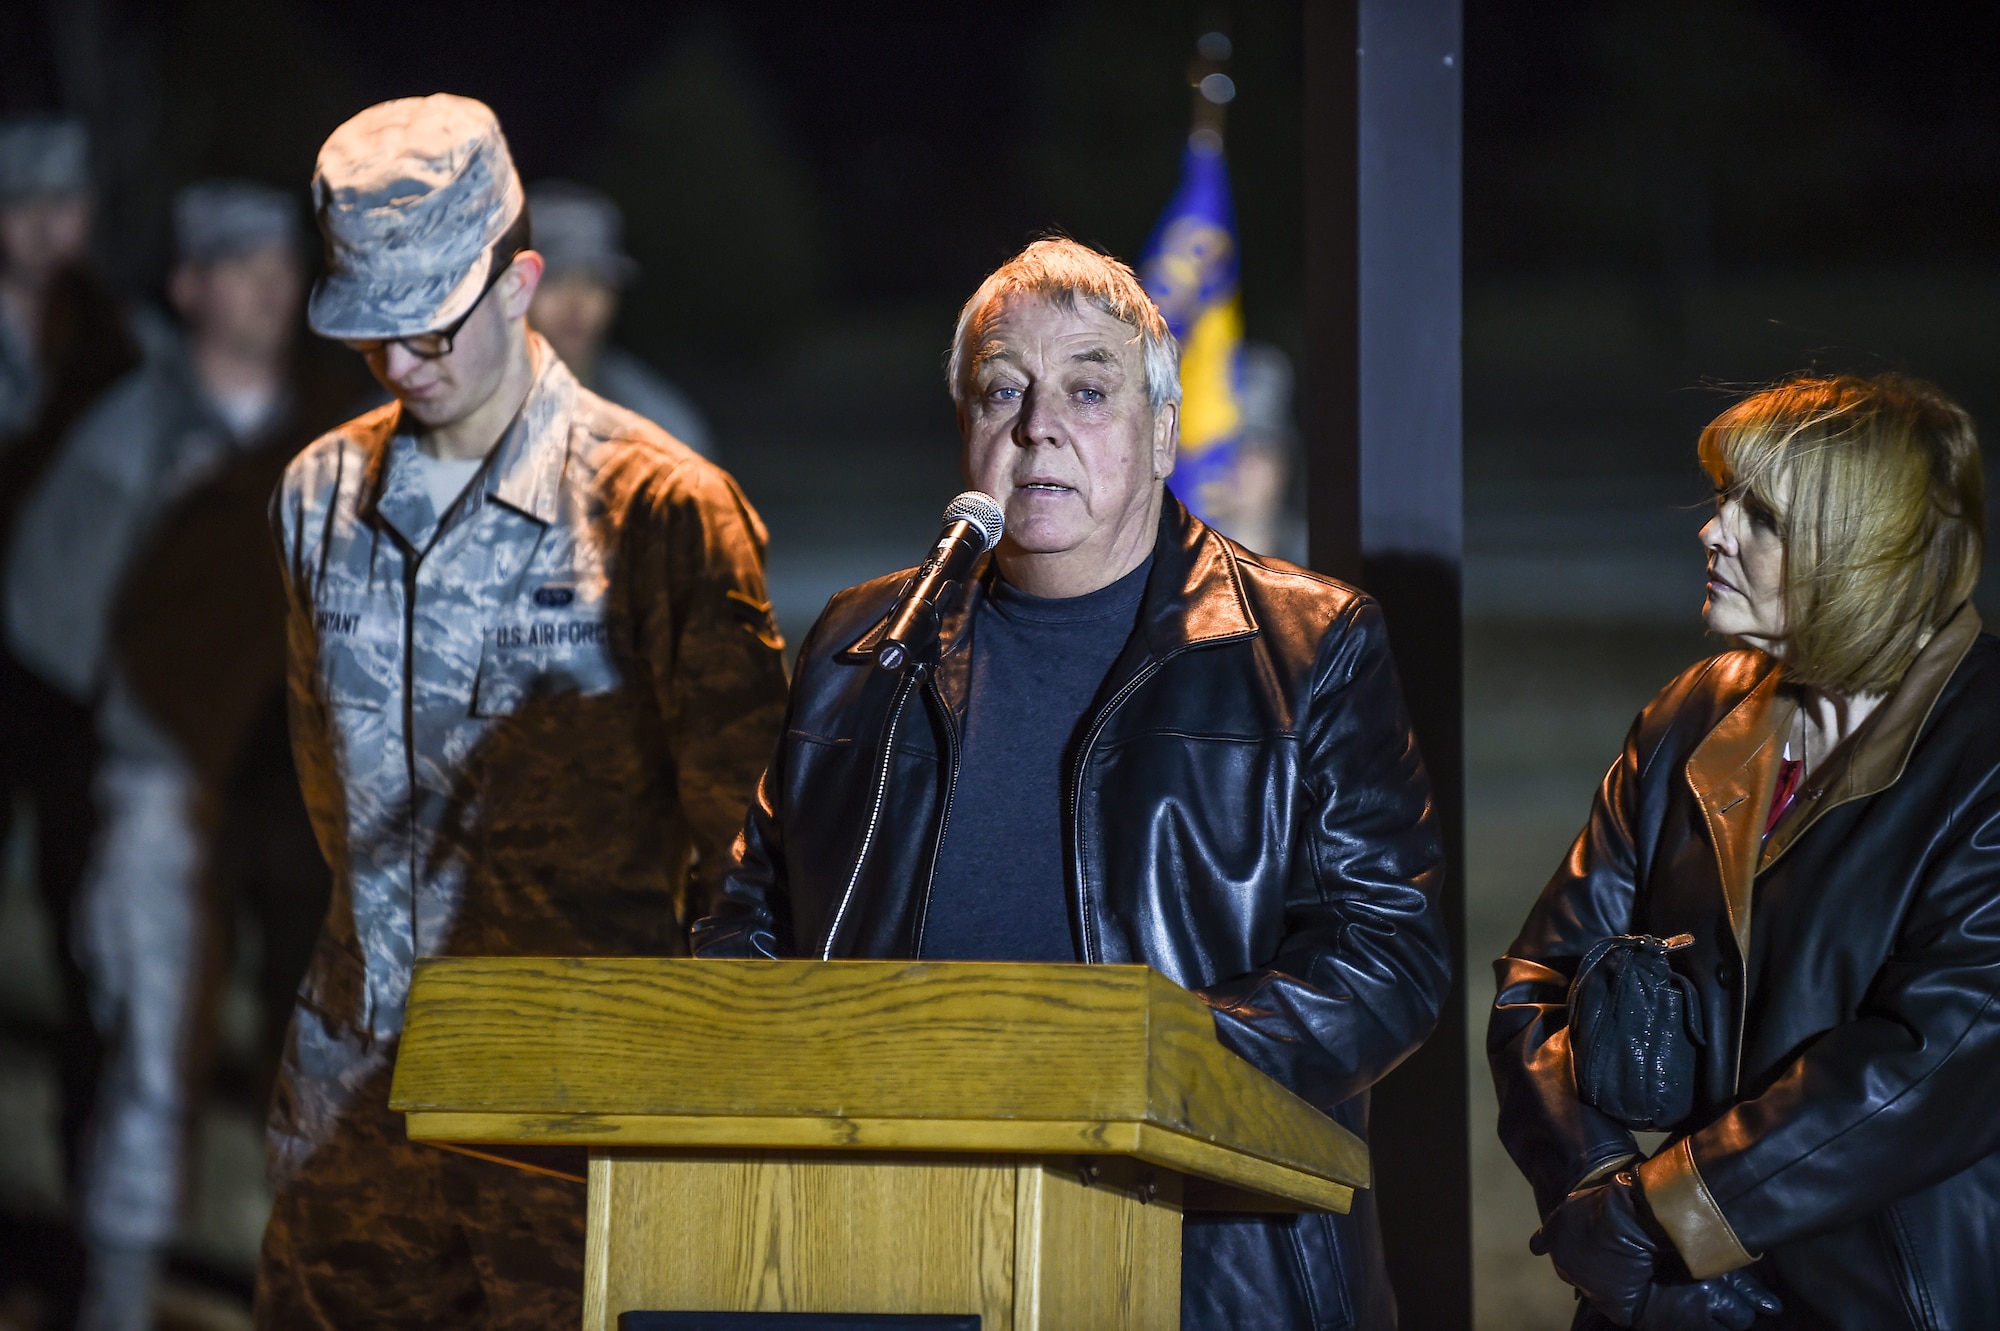 Craig Mansfield, father of the late Senior Airman Kristopher Mansfield, speaks about his son during a tree-lighting ceremony Dec. 2, 2014, on Buckley Air Force Base, Colo. The ceremony honored Kristopher and Senior Airman Michael Snyder, both members of the 460th Space Communications Squadron who were killed by drunk drivers. (U.S. Air Force photo by Senior Airman Riley Johnson/Released)